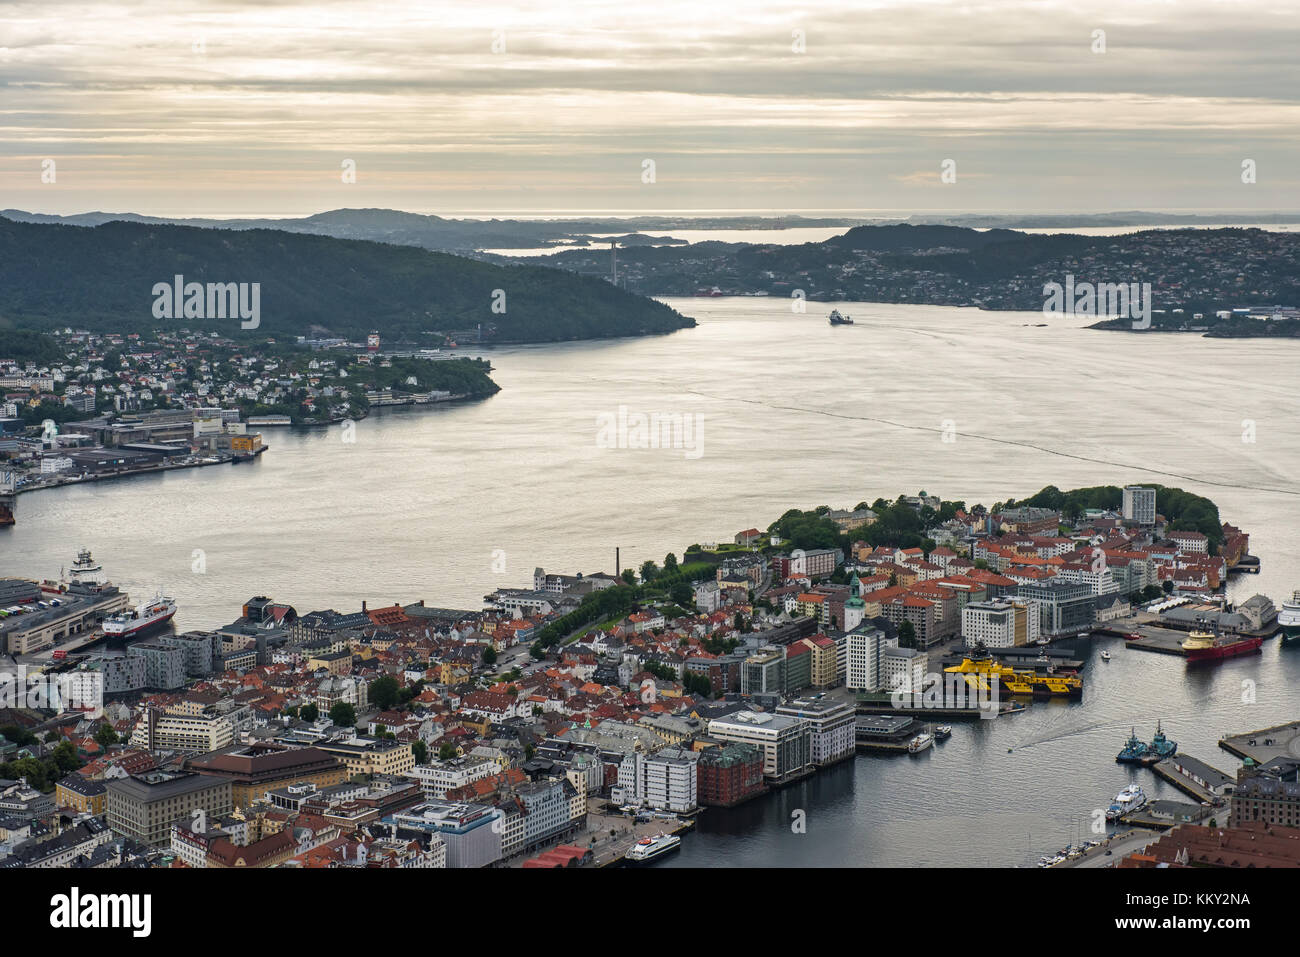 Aeral view of colorful city Bergen, Norway Stock Photo